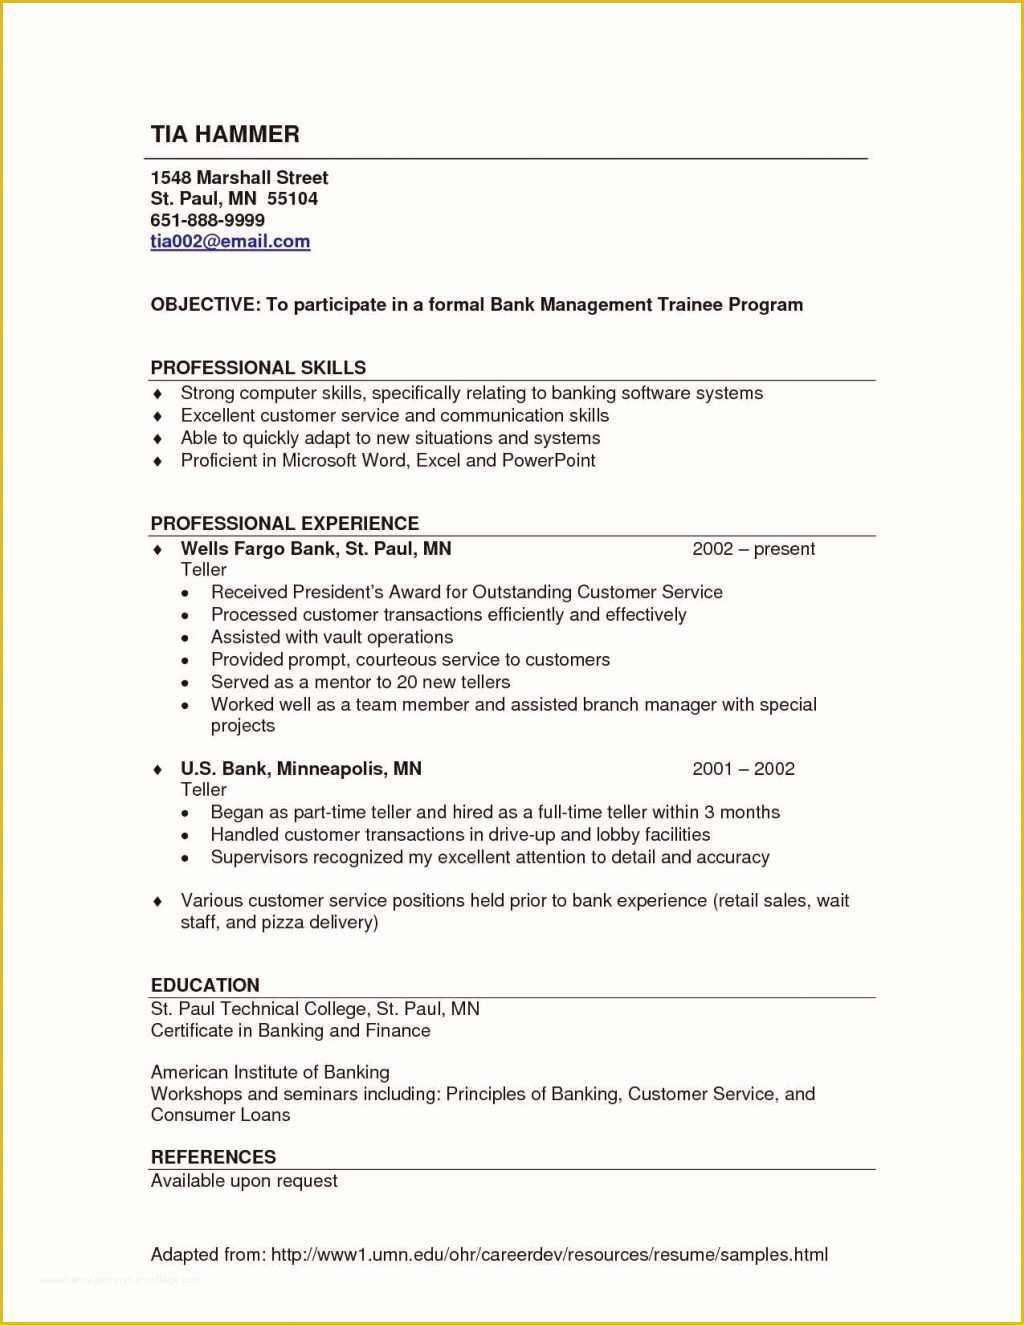 Free Sample Professional Resume Template Of Resume and Template Phenomenal 2019 Professional Resume